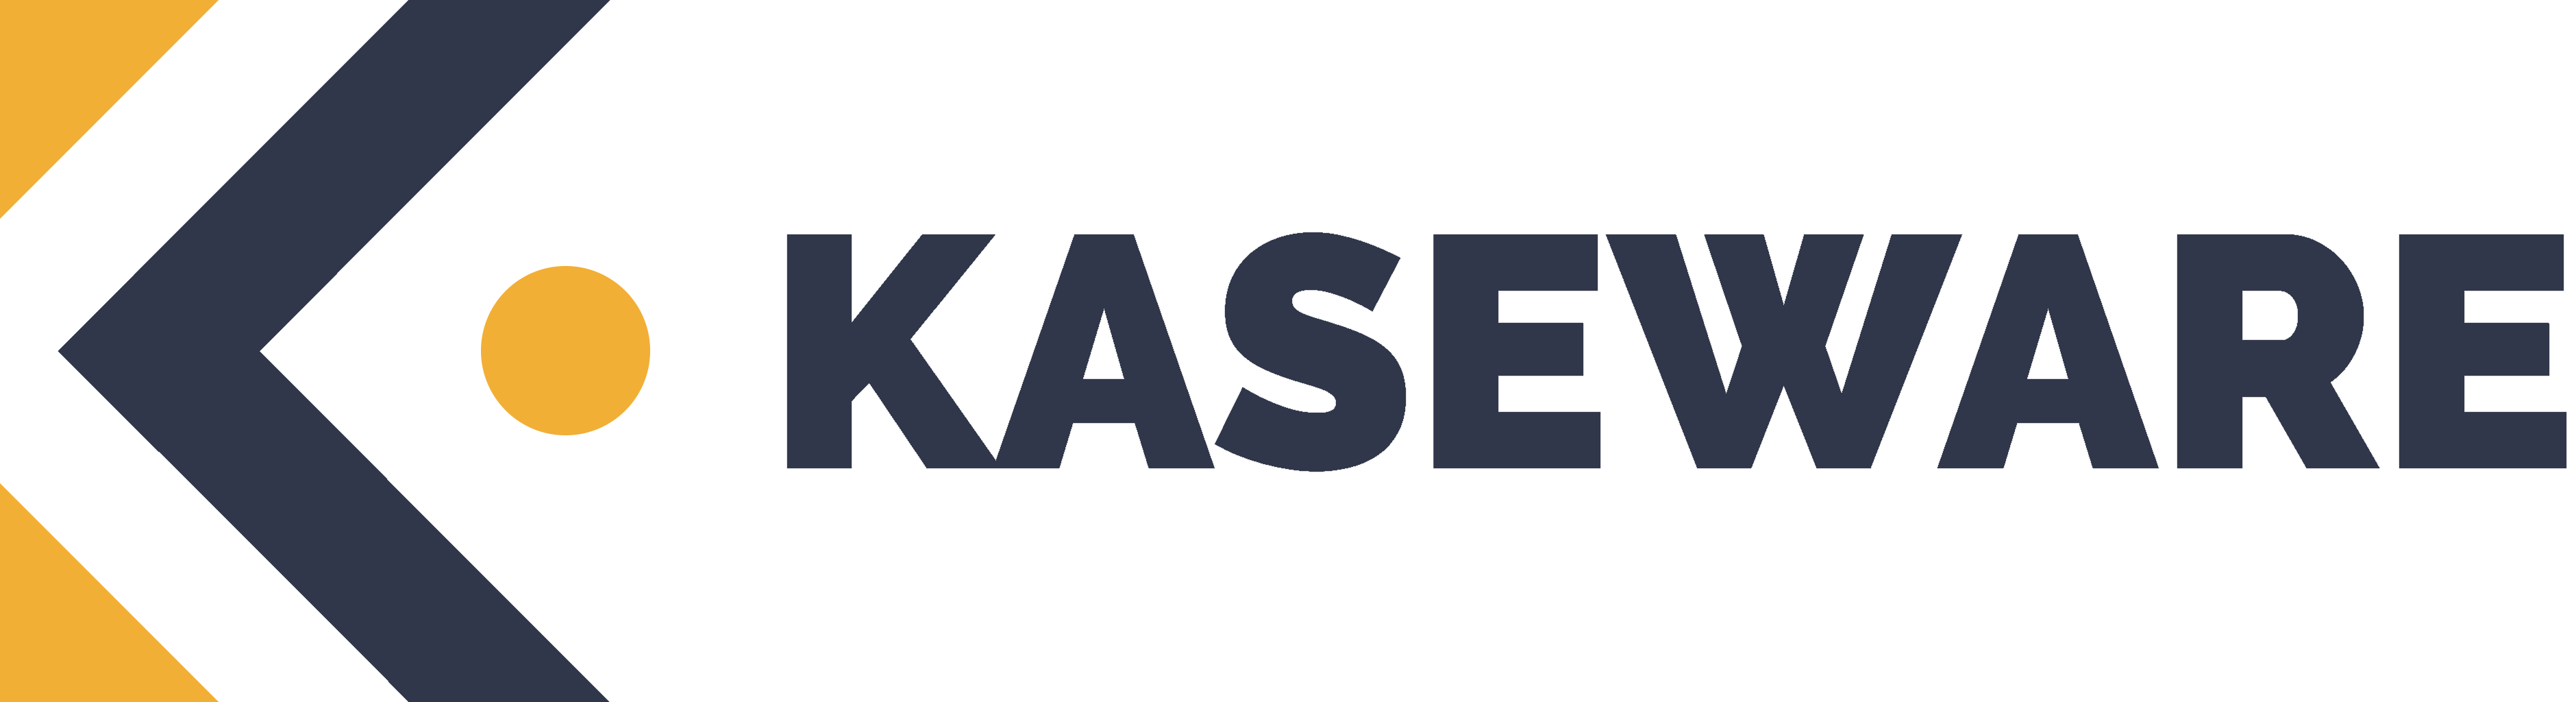 Kaseware Announces Strategic Investment from The Riverside Company